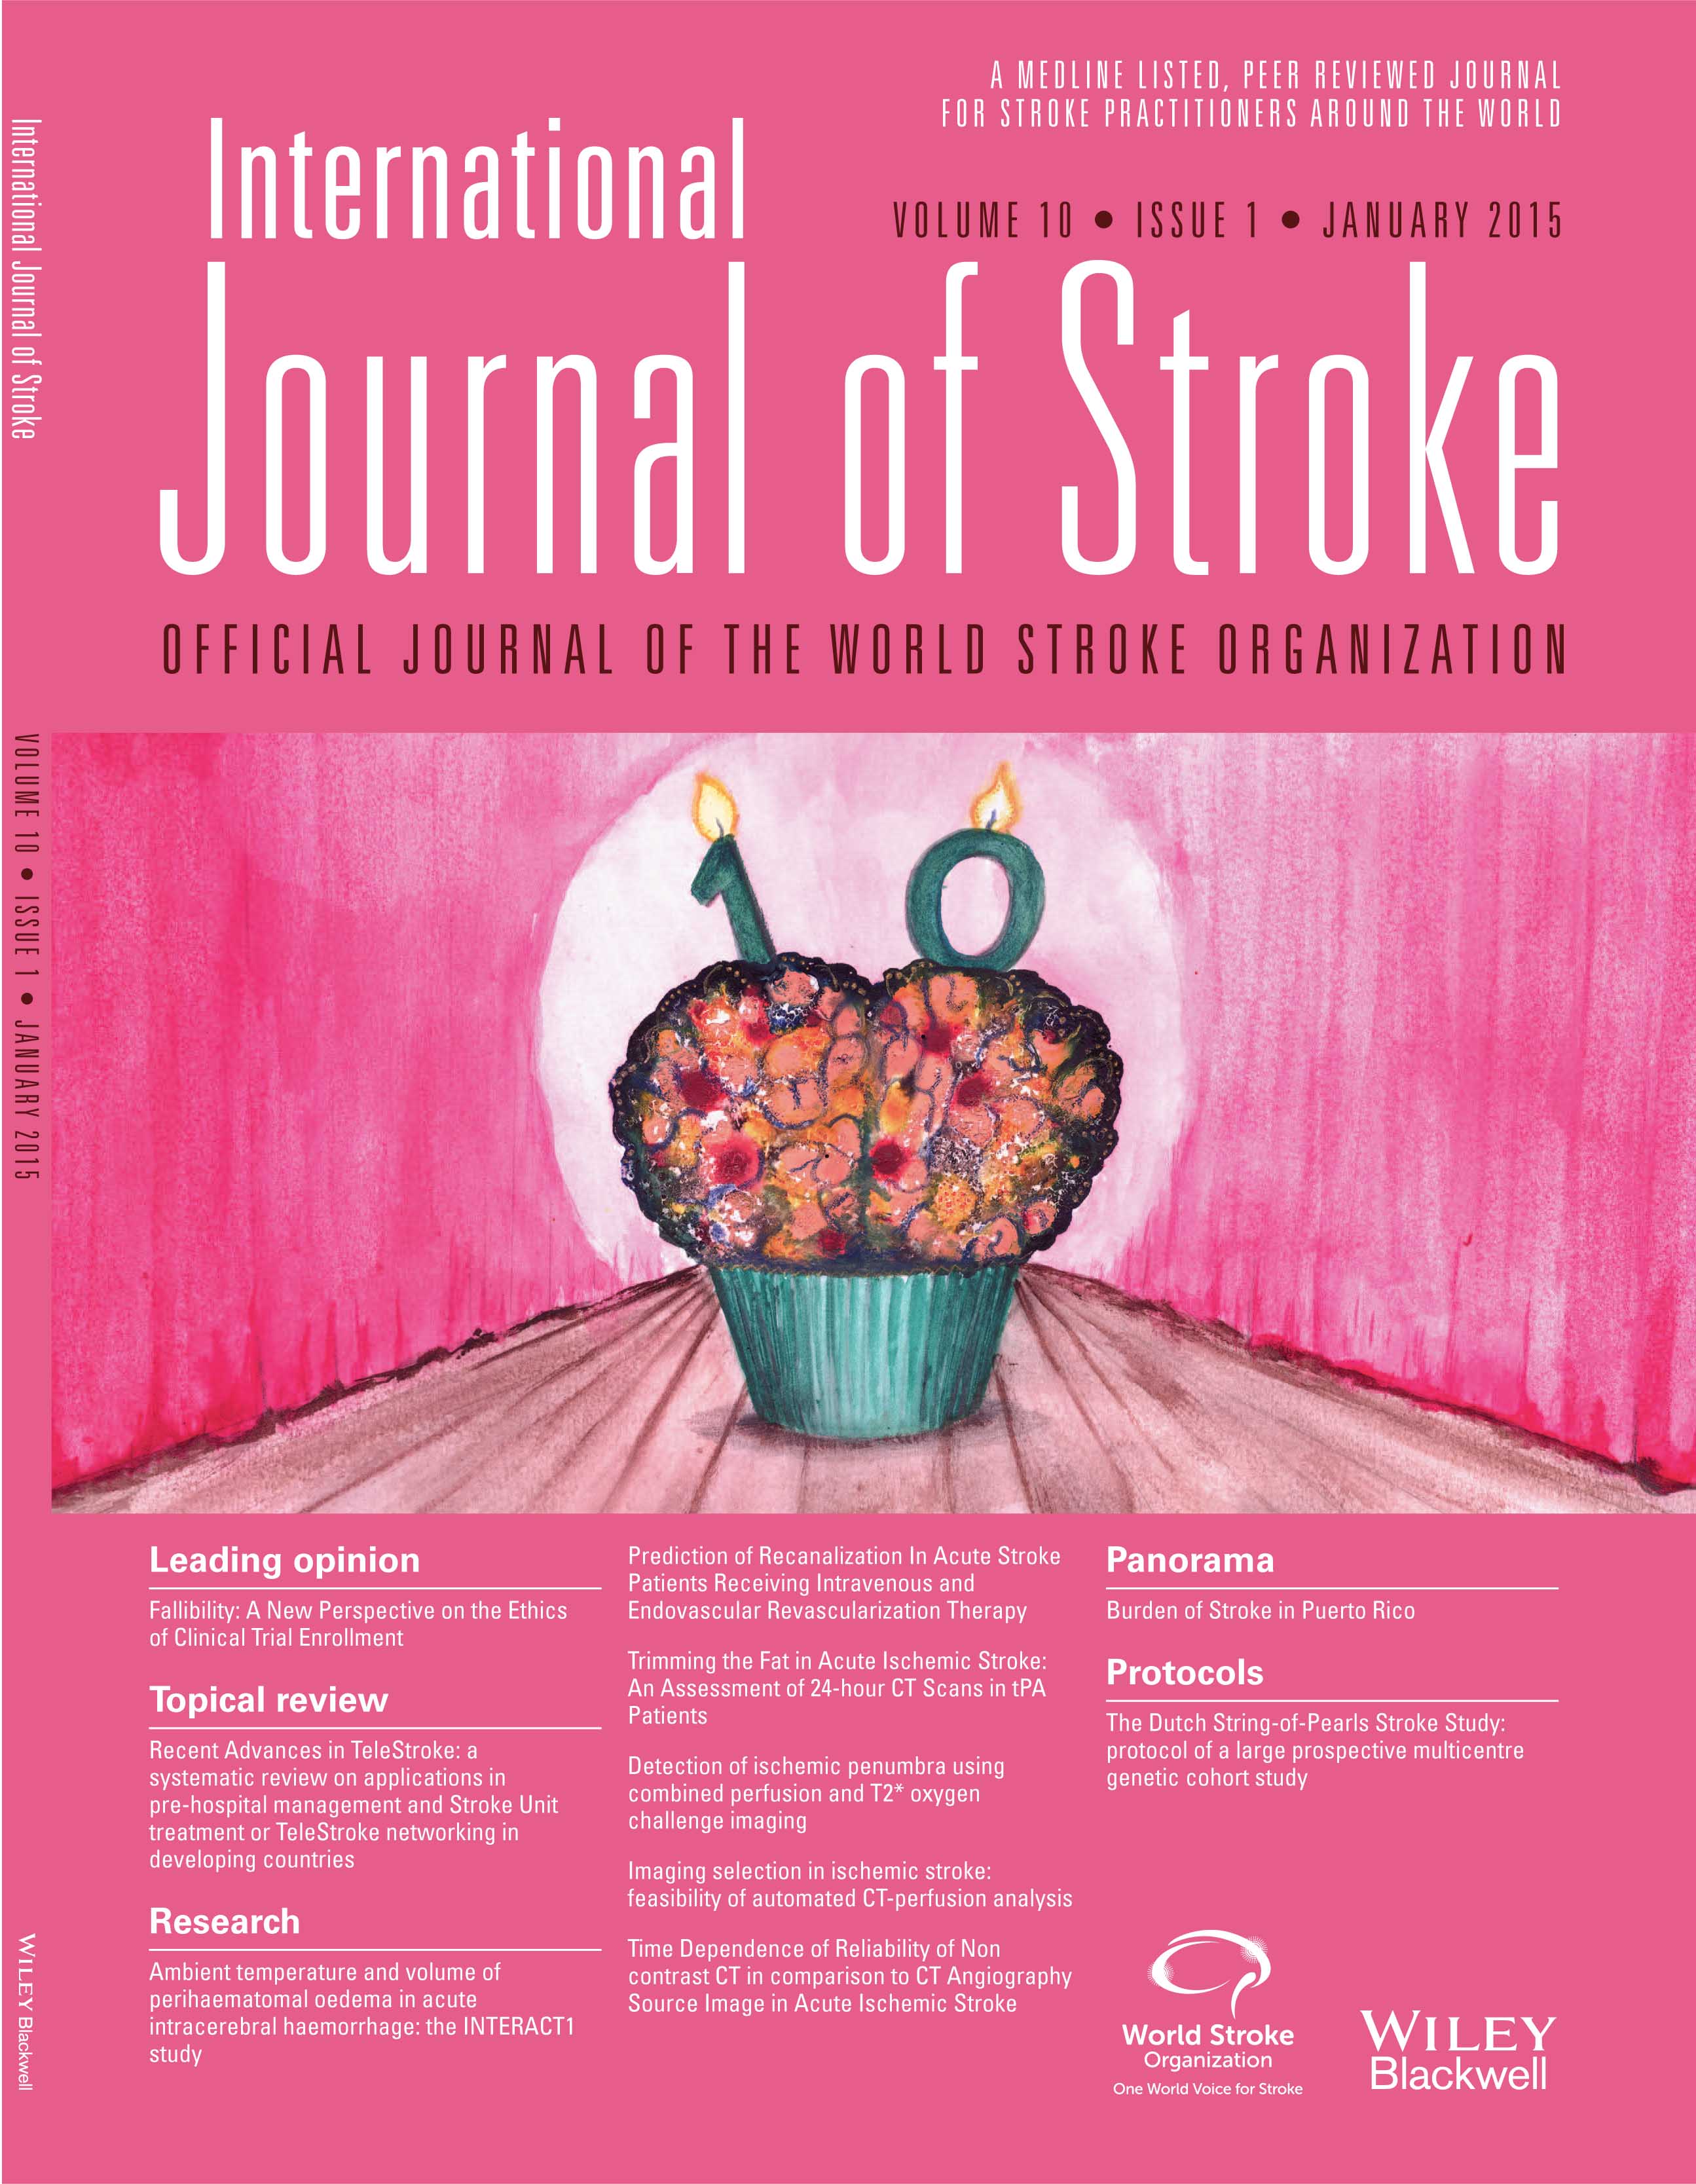 Stroke in Bahrain: rising incidence, multiple risk factors, and sub-optimal care, published in Volume 10 Issue 4, June 2015 International Journal of Stroke 